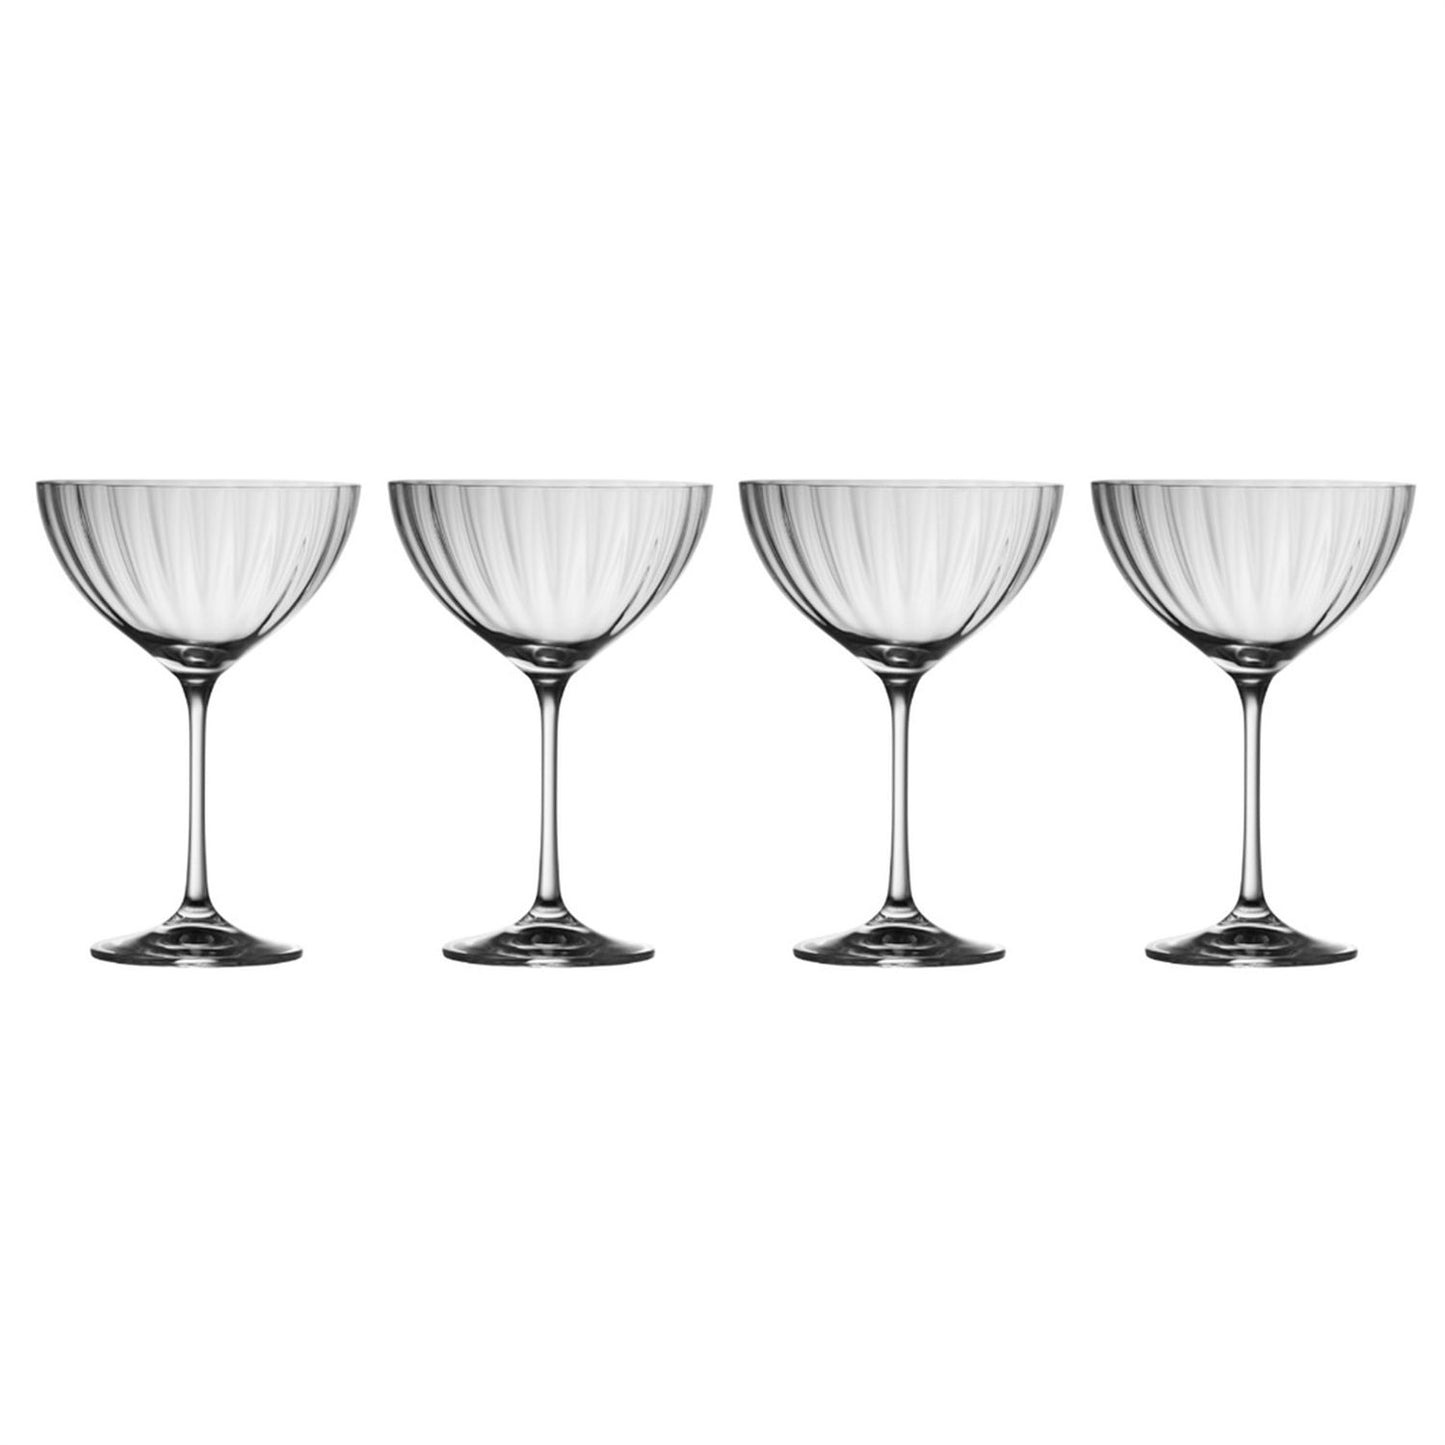 Galway Erne Saucer Champagne, Set of 4